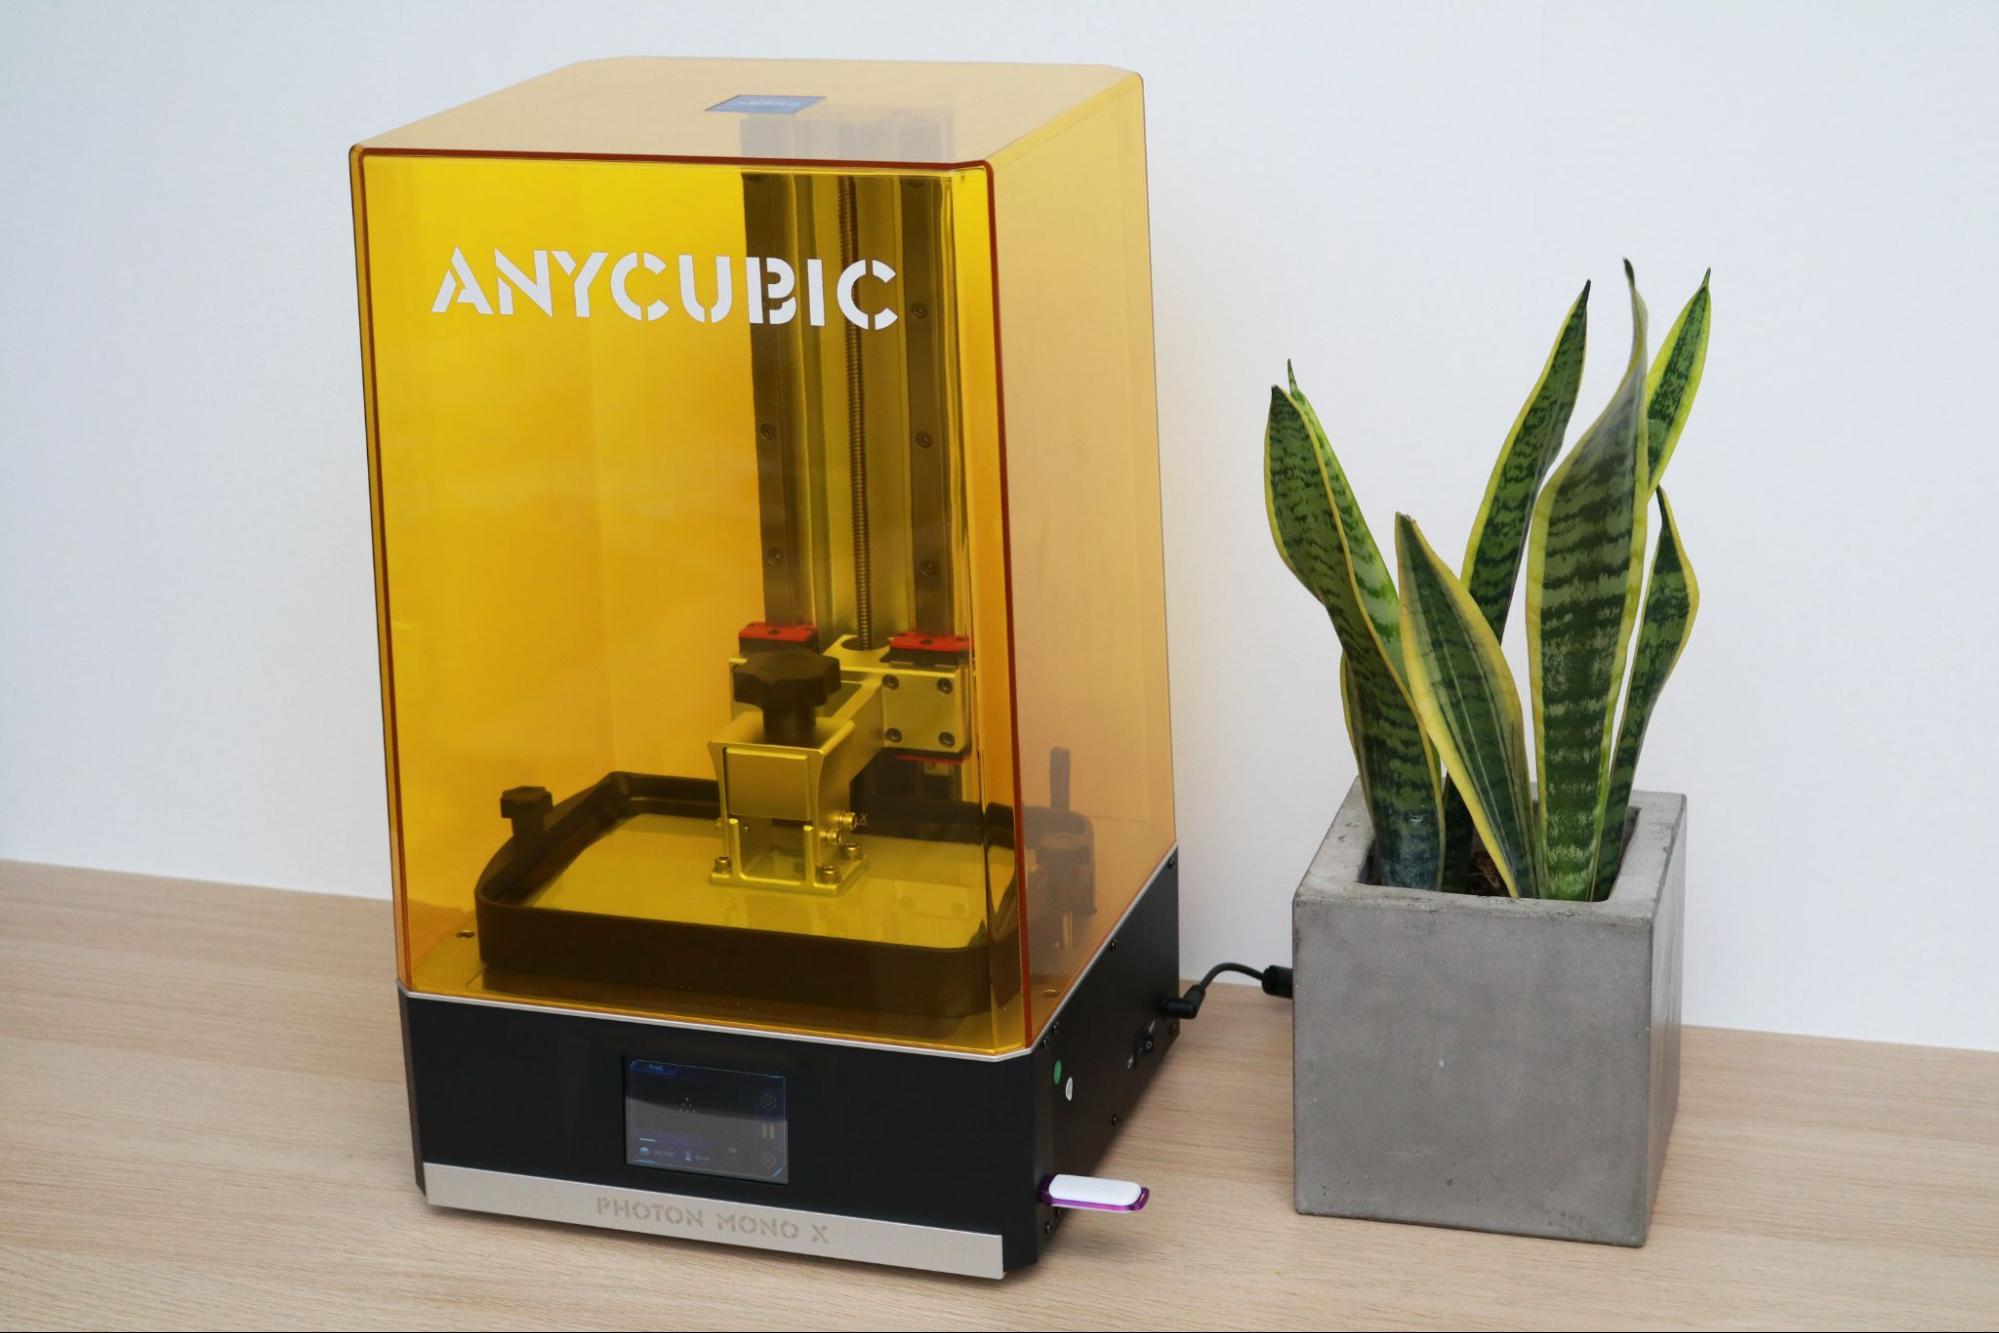 Anycubic Photon Mono 2 - Bigger and Higher Resolution 3D Printer +